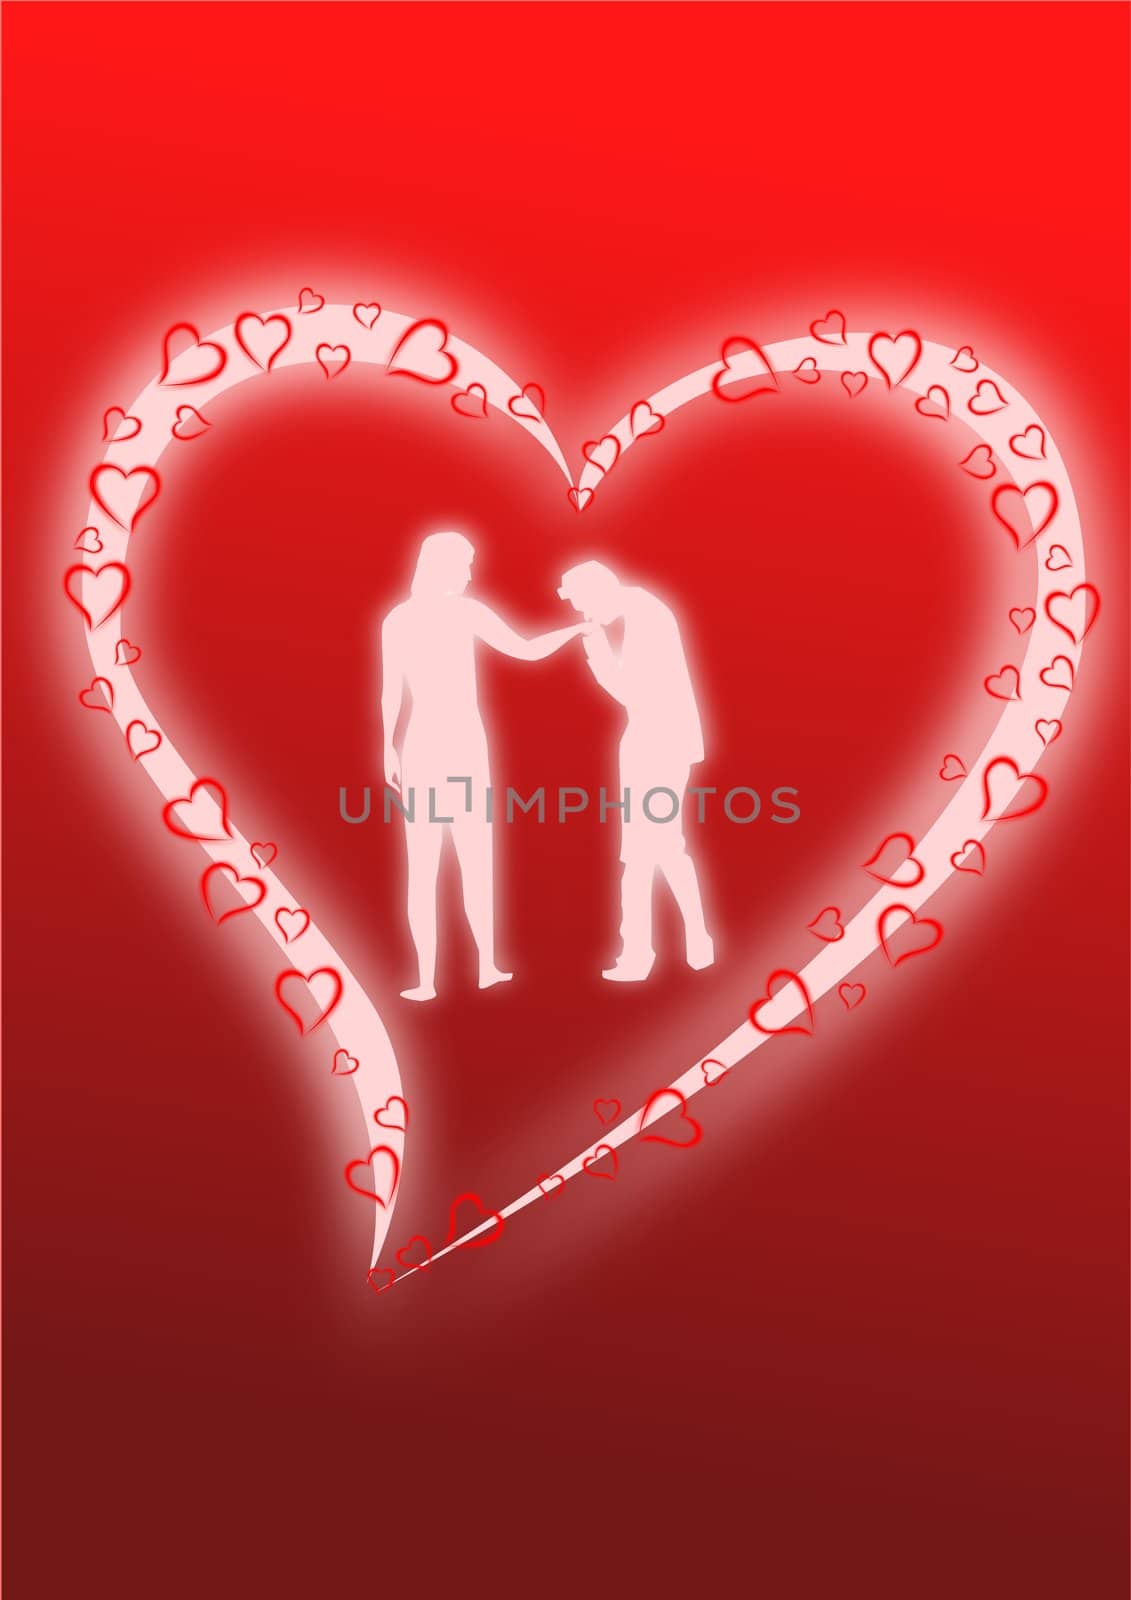 A pair of lovers dancing as glowing silhouettes against glowing heart.